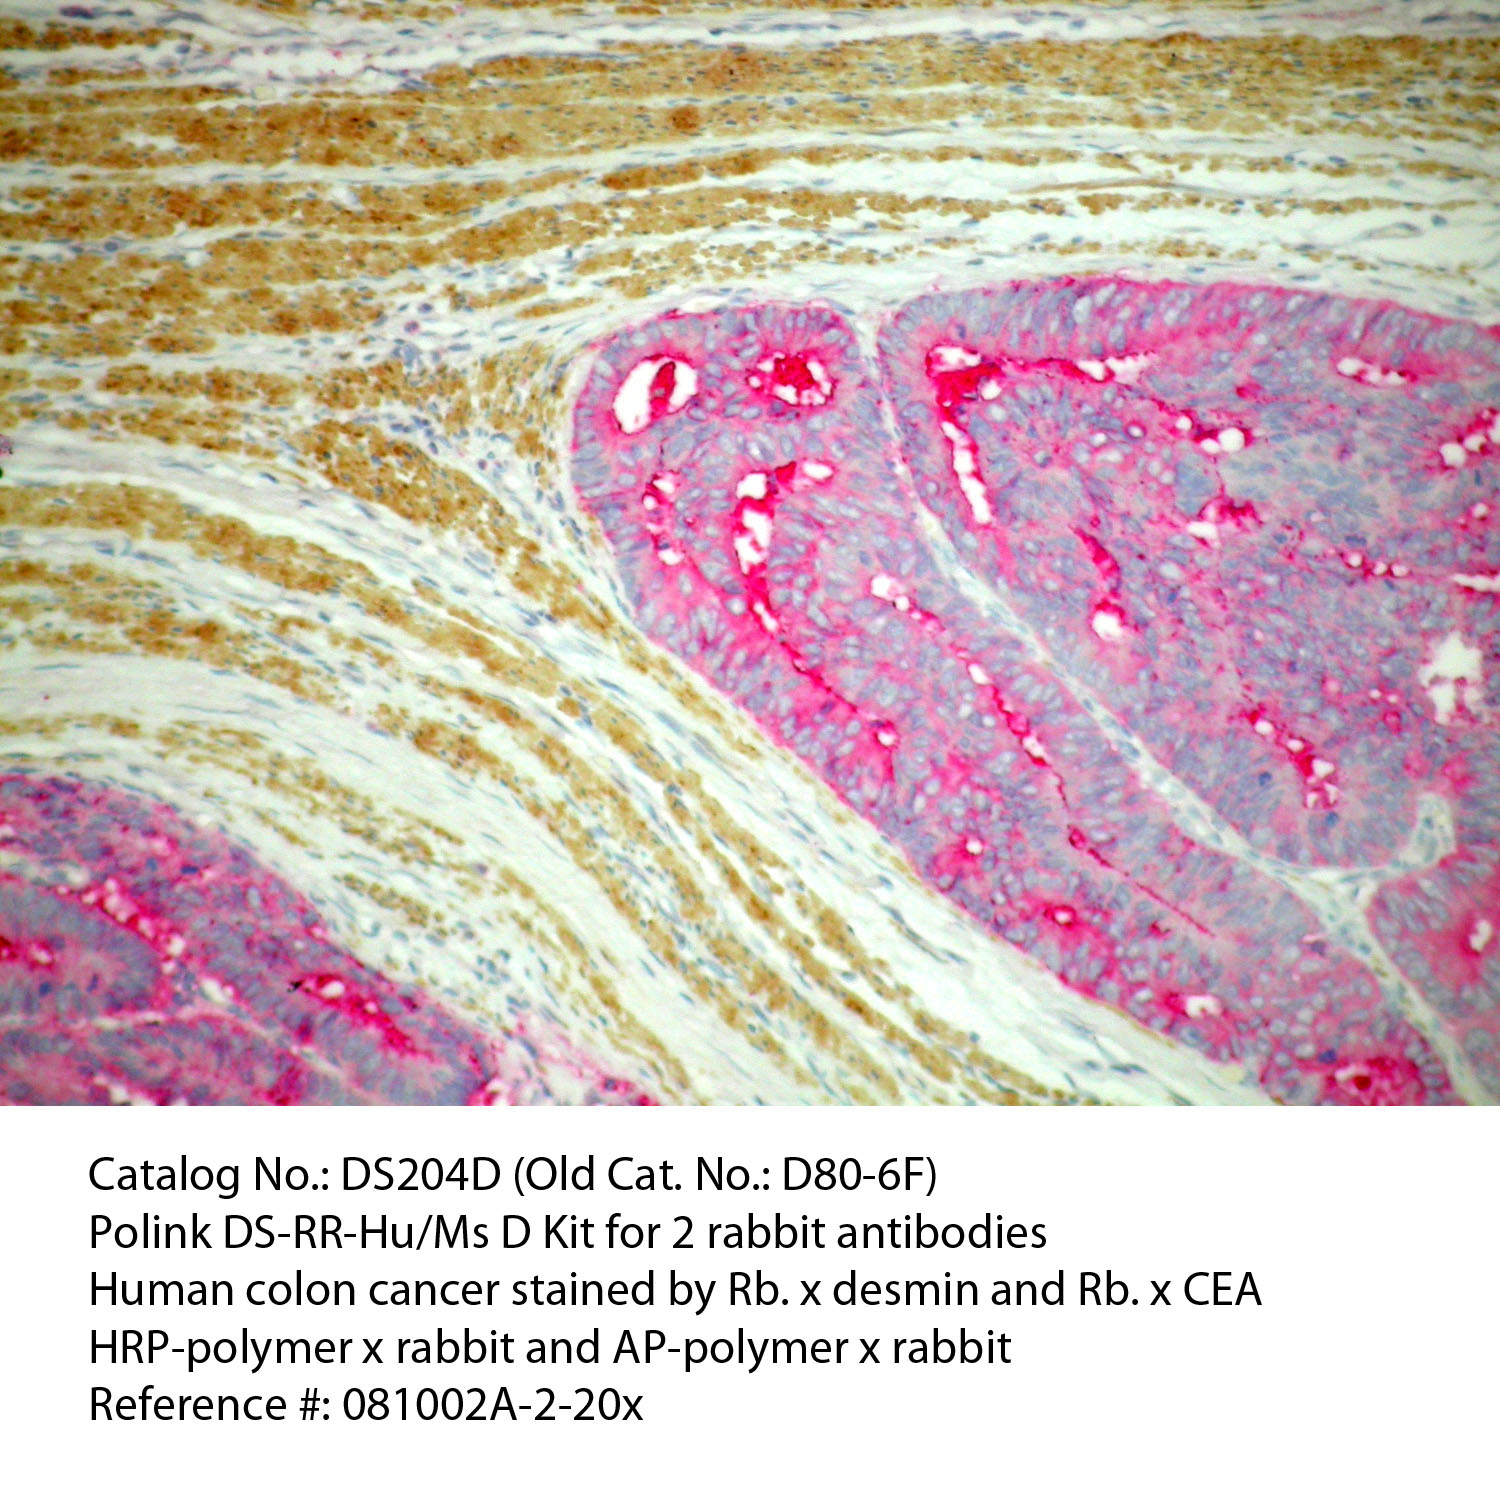 IHC staining of FFPE human colon cancer tissue using rabbit anti-desmin and rabbit anti-CEA polyclonal antibodies and Polink DS-RR-Hu/Ms A detection kit [DS204A-18]. The red (Mouse anti-B cell) and brown (Rabbit anti-CD3) stain indicate positive stain and blue background is the counter stain. It is mounted using a permanent aqueous mounting medium [E03-18].